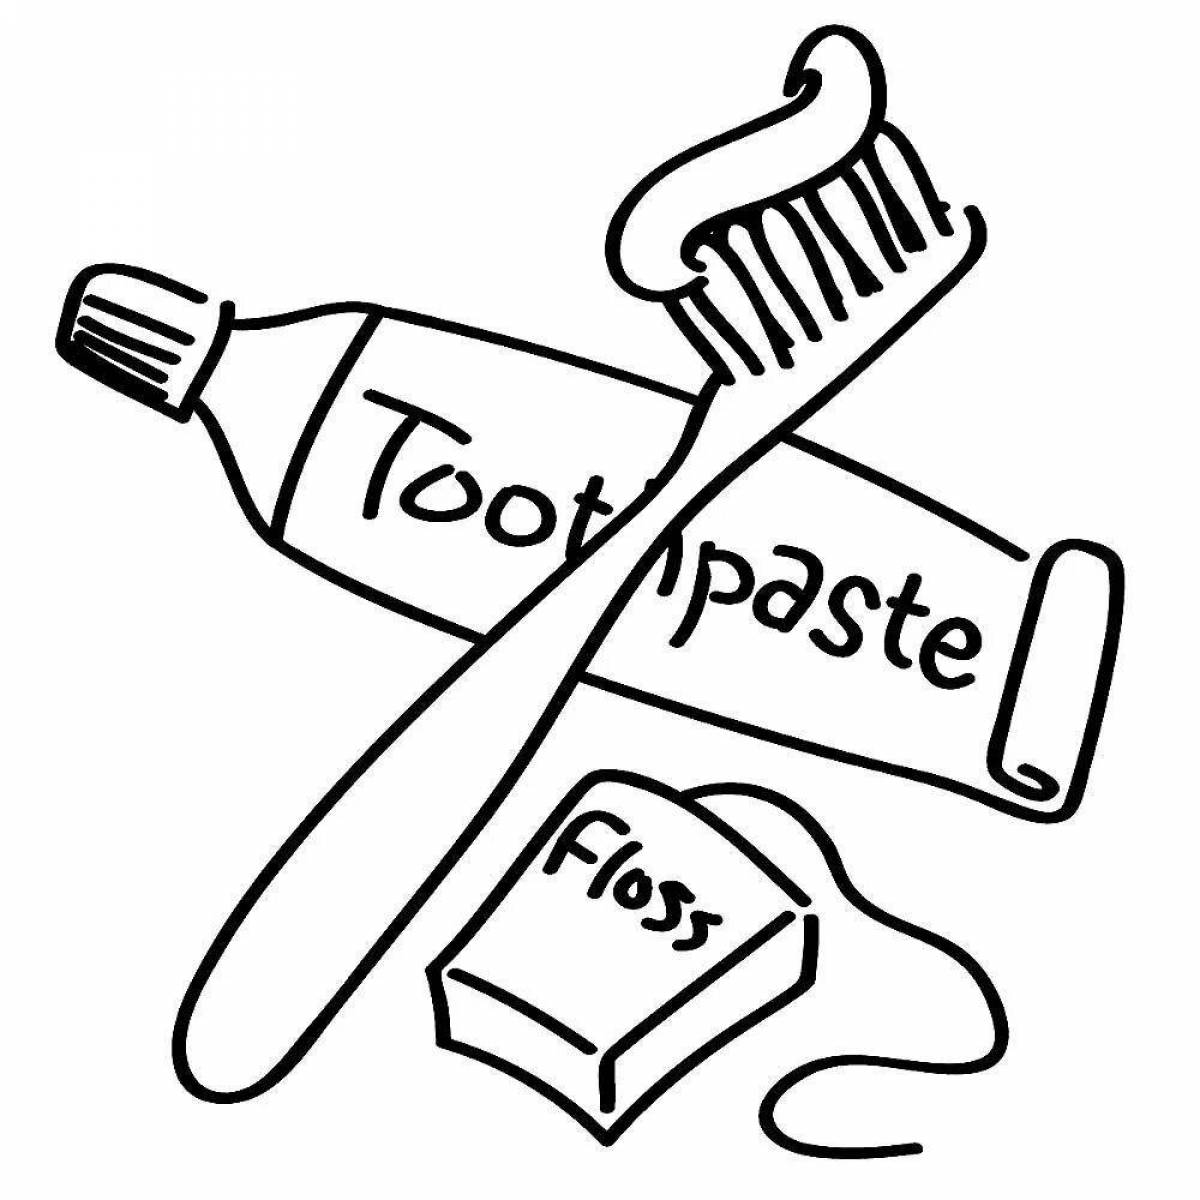 Adorable toothpaste coloring book for kids